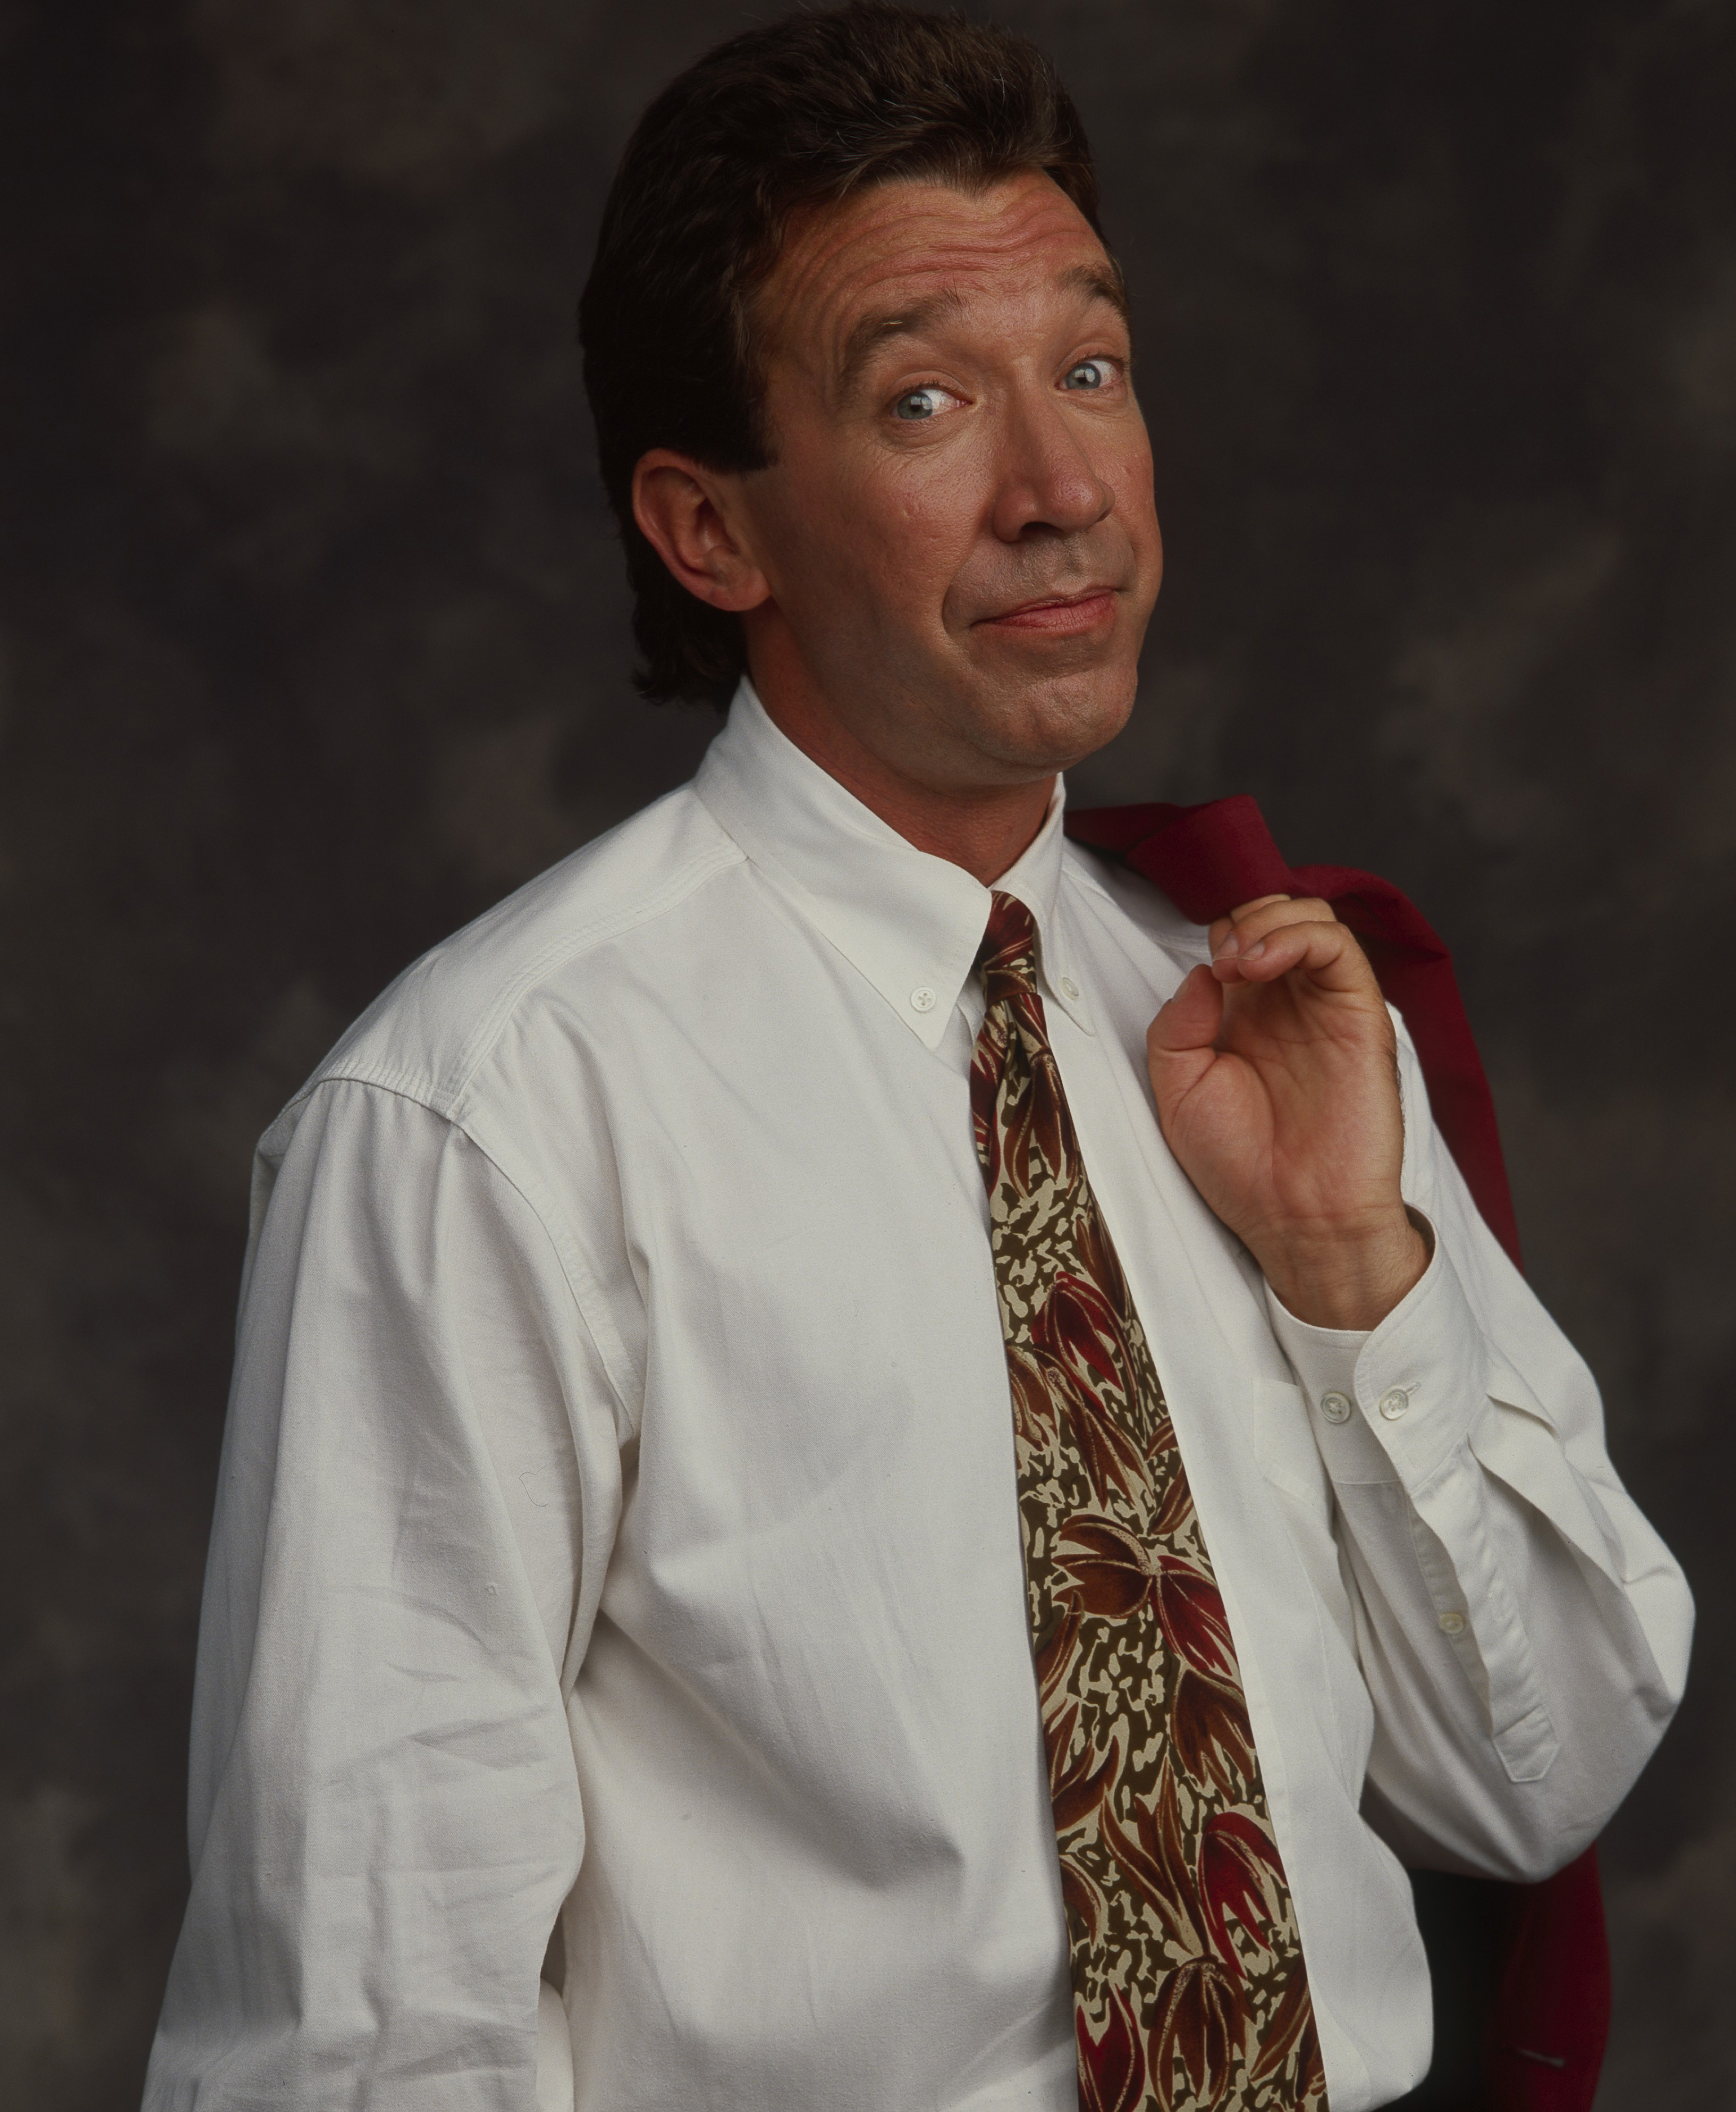 Tim Allen for "Home Improvement," circa 1991 | Source: Getty Images